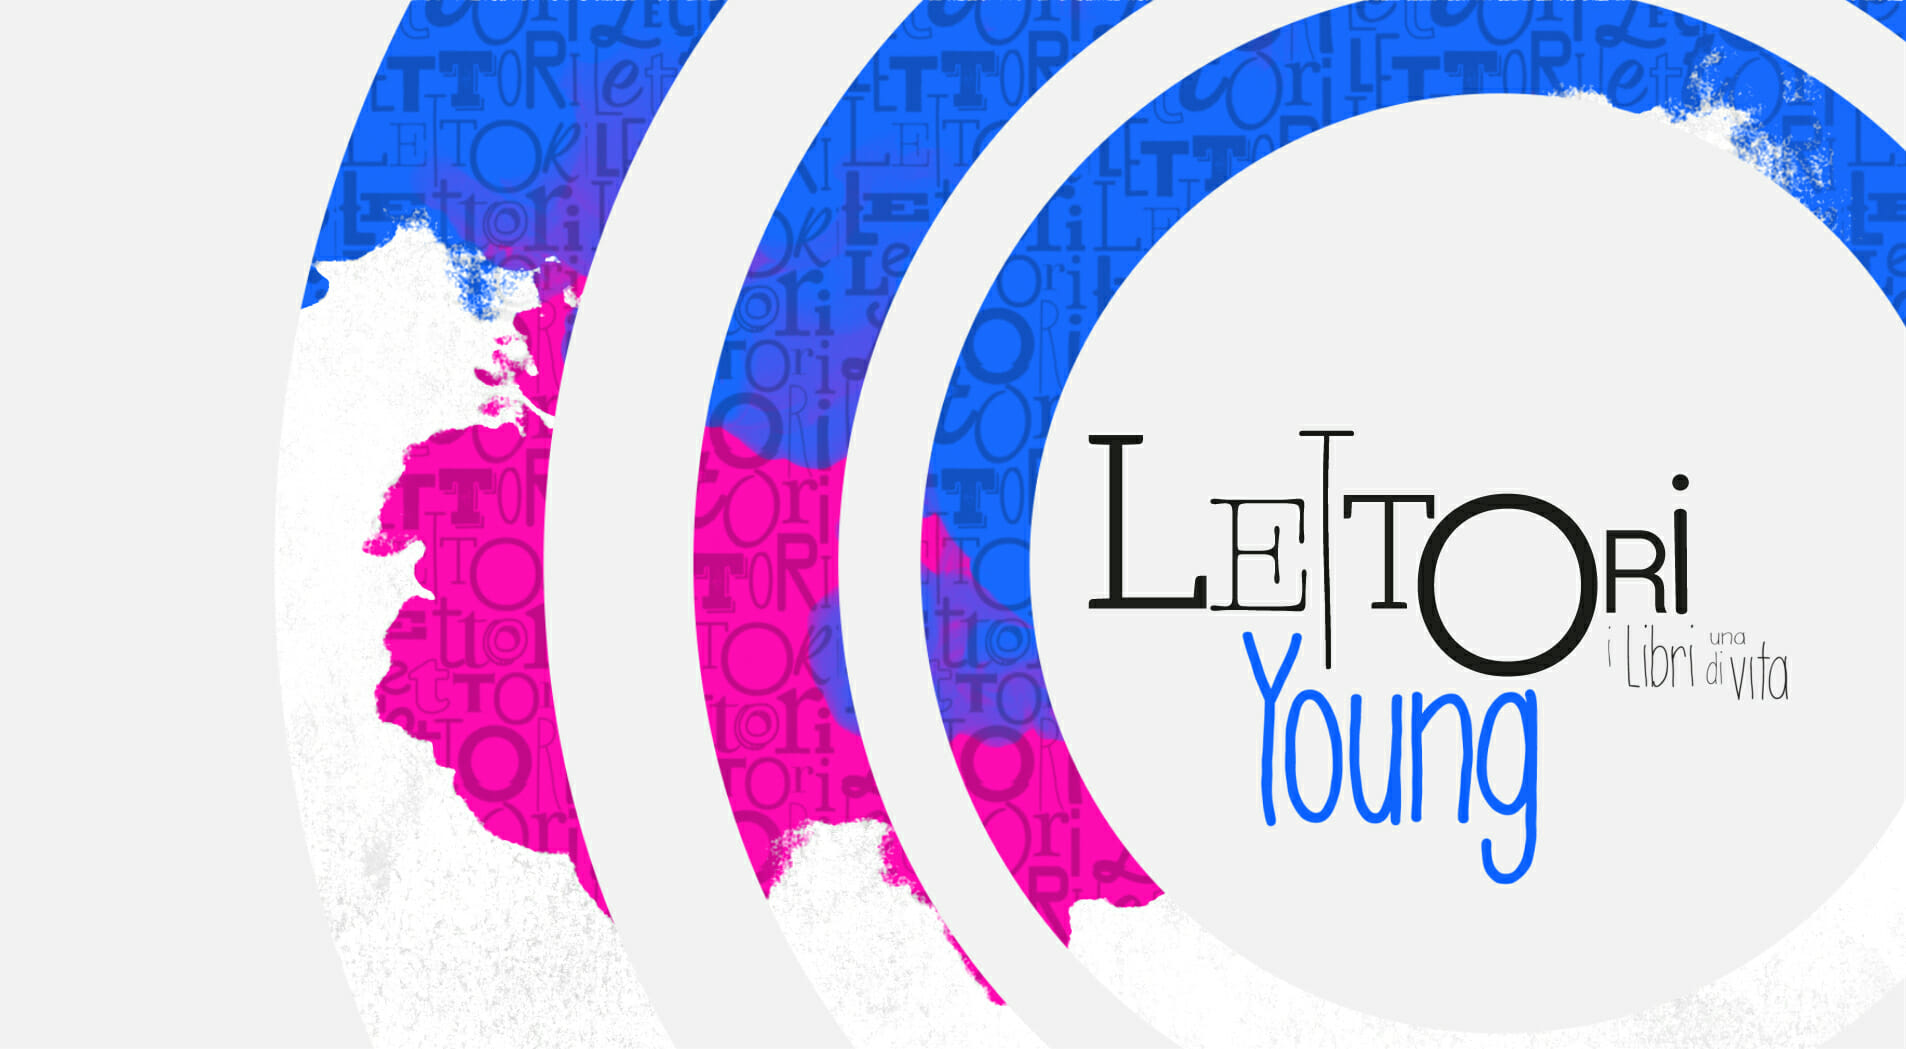 Logo Lettori Young laF